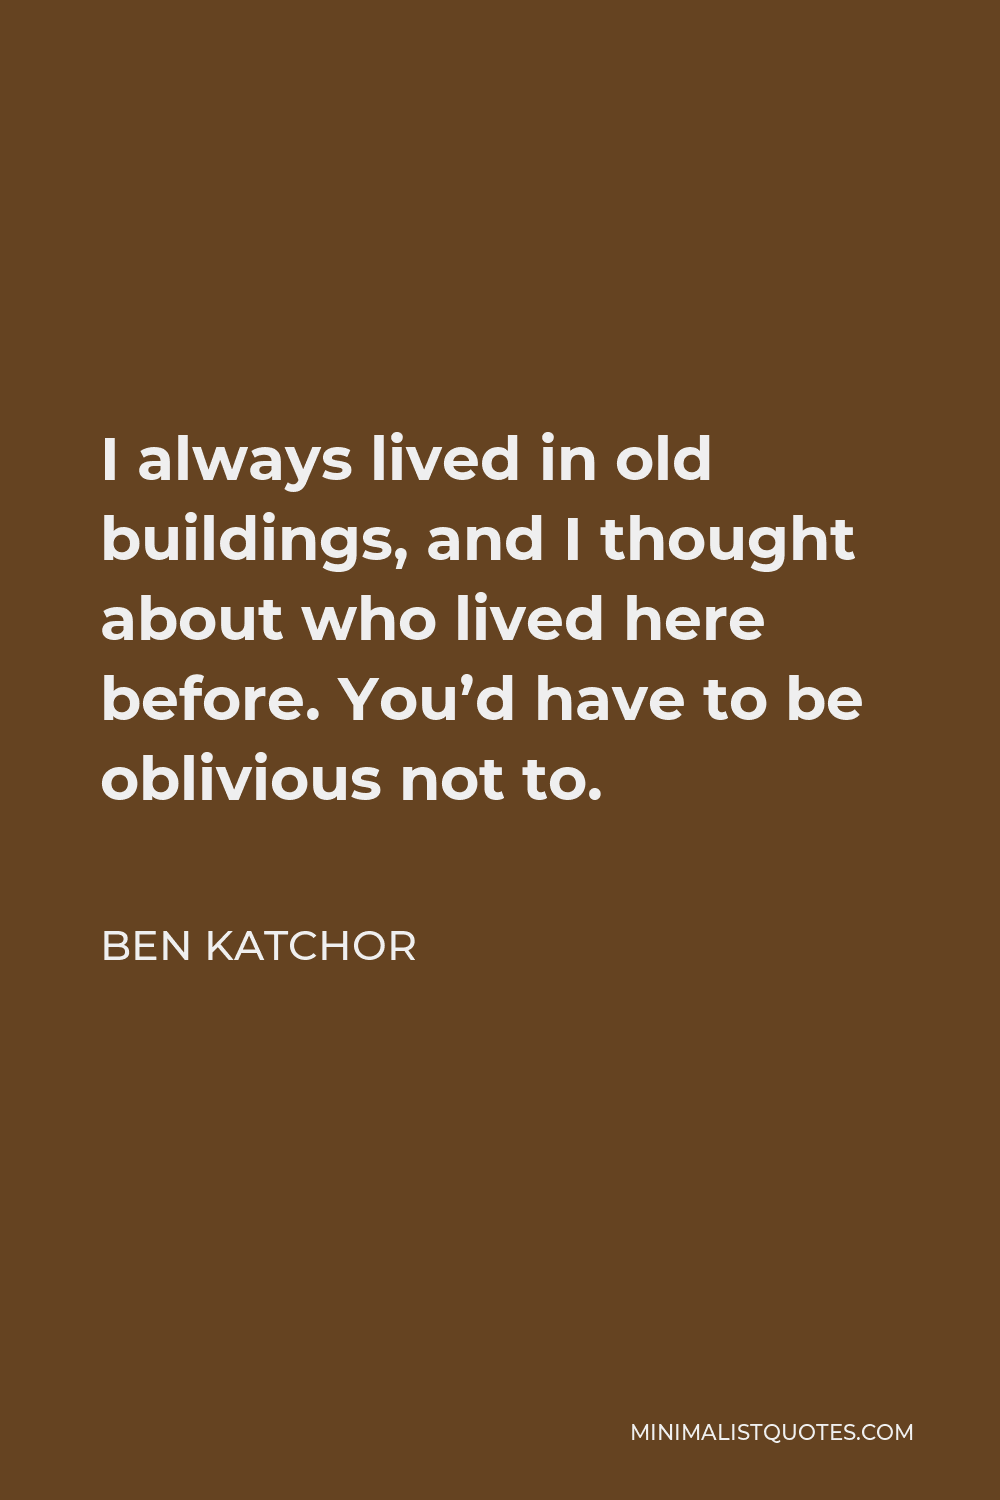 Ben Katchor Quote - I always lived in old buildings, and I thought about who lived here before. You’d have to be oblivious not to.